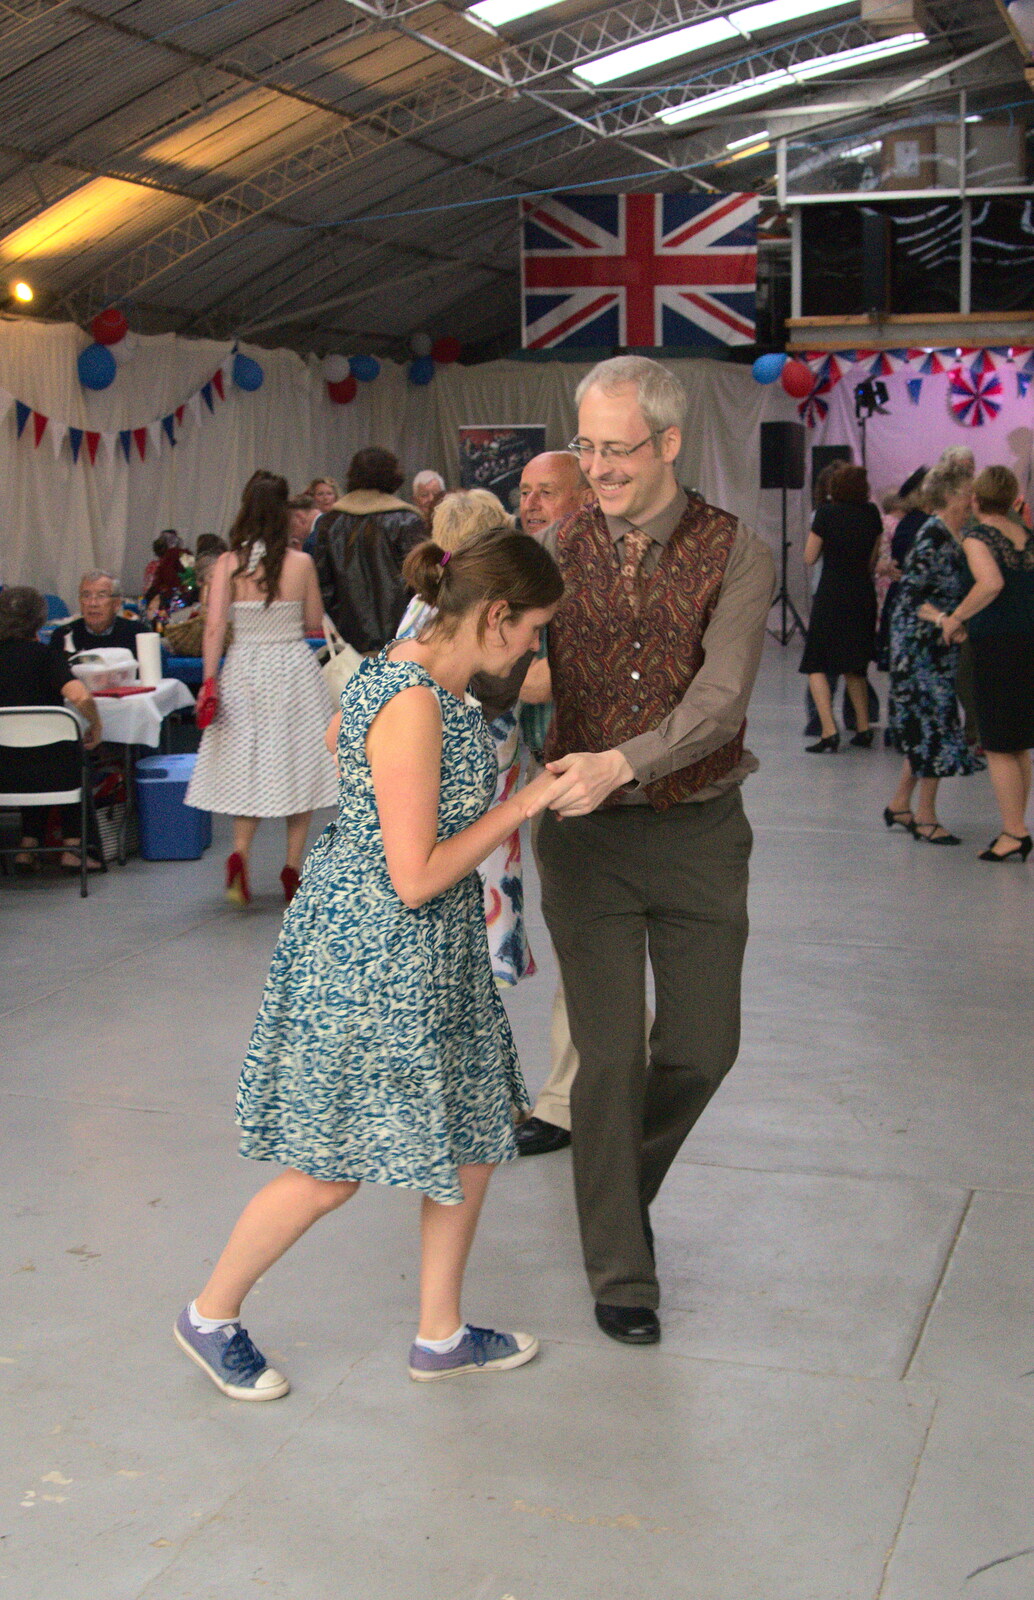 Isobel gets a quick dancing lesson from "Our Little Friends" Warbirds Hangar Dance, Hardwick, Norfolk - 9th July 2016